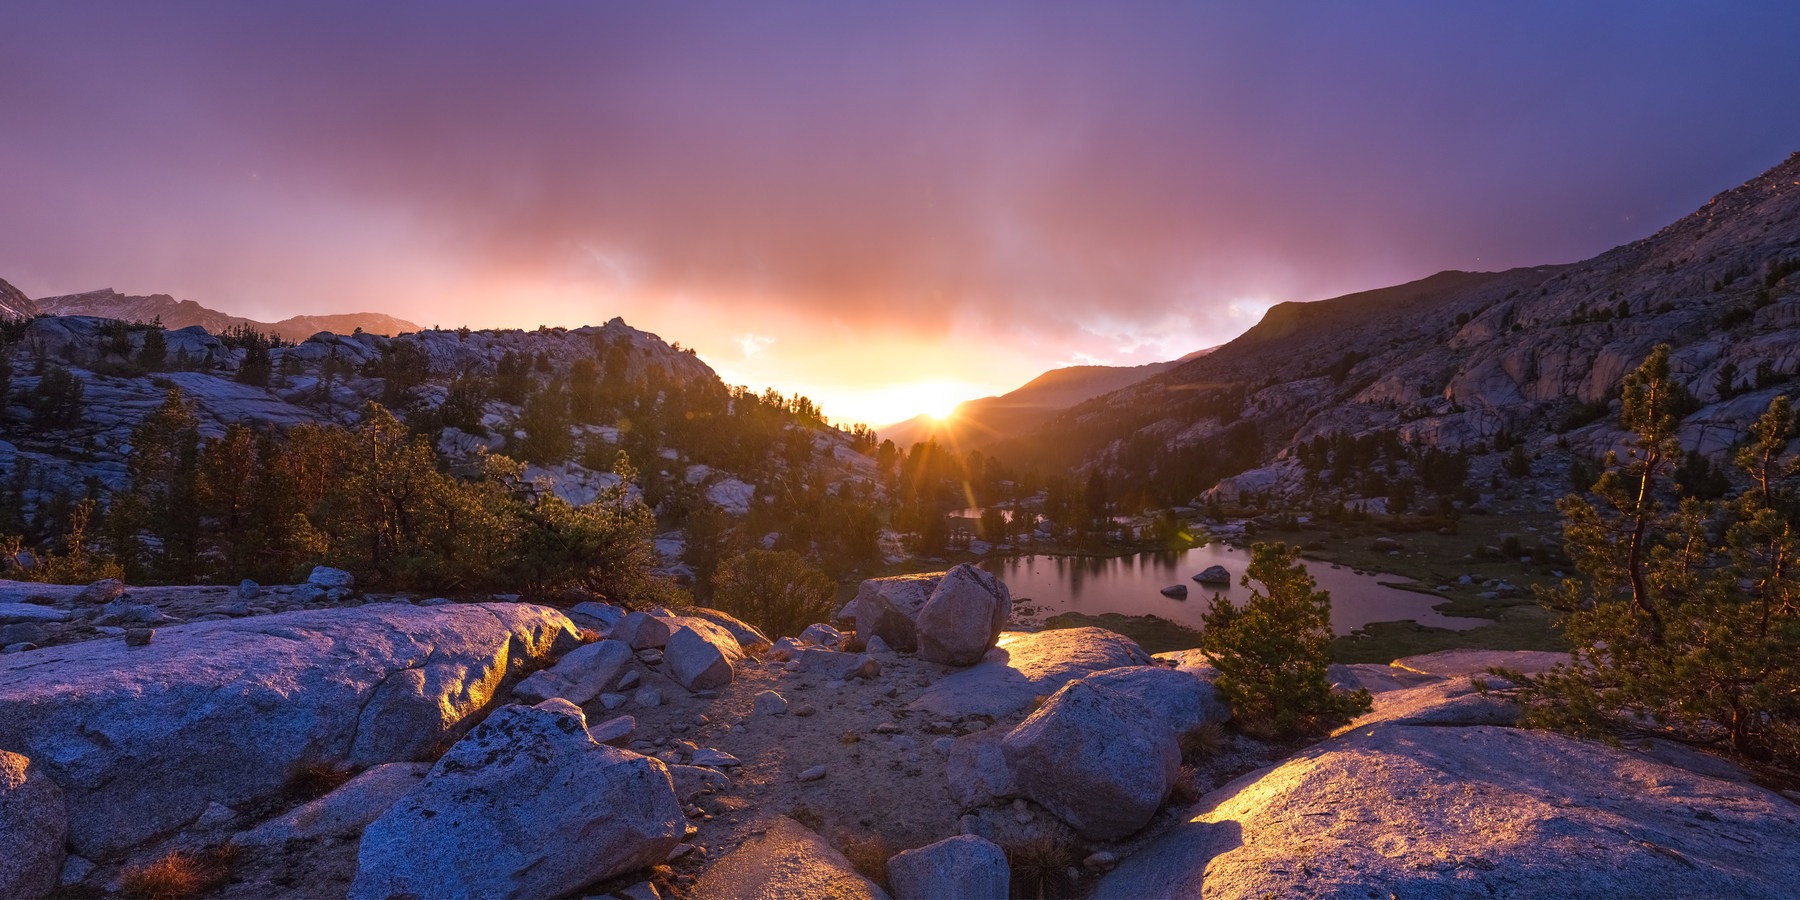 15 Views that Will Inspire You to Hike the John Muir Trail - Outdoor ...